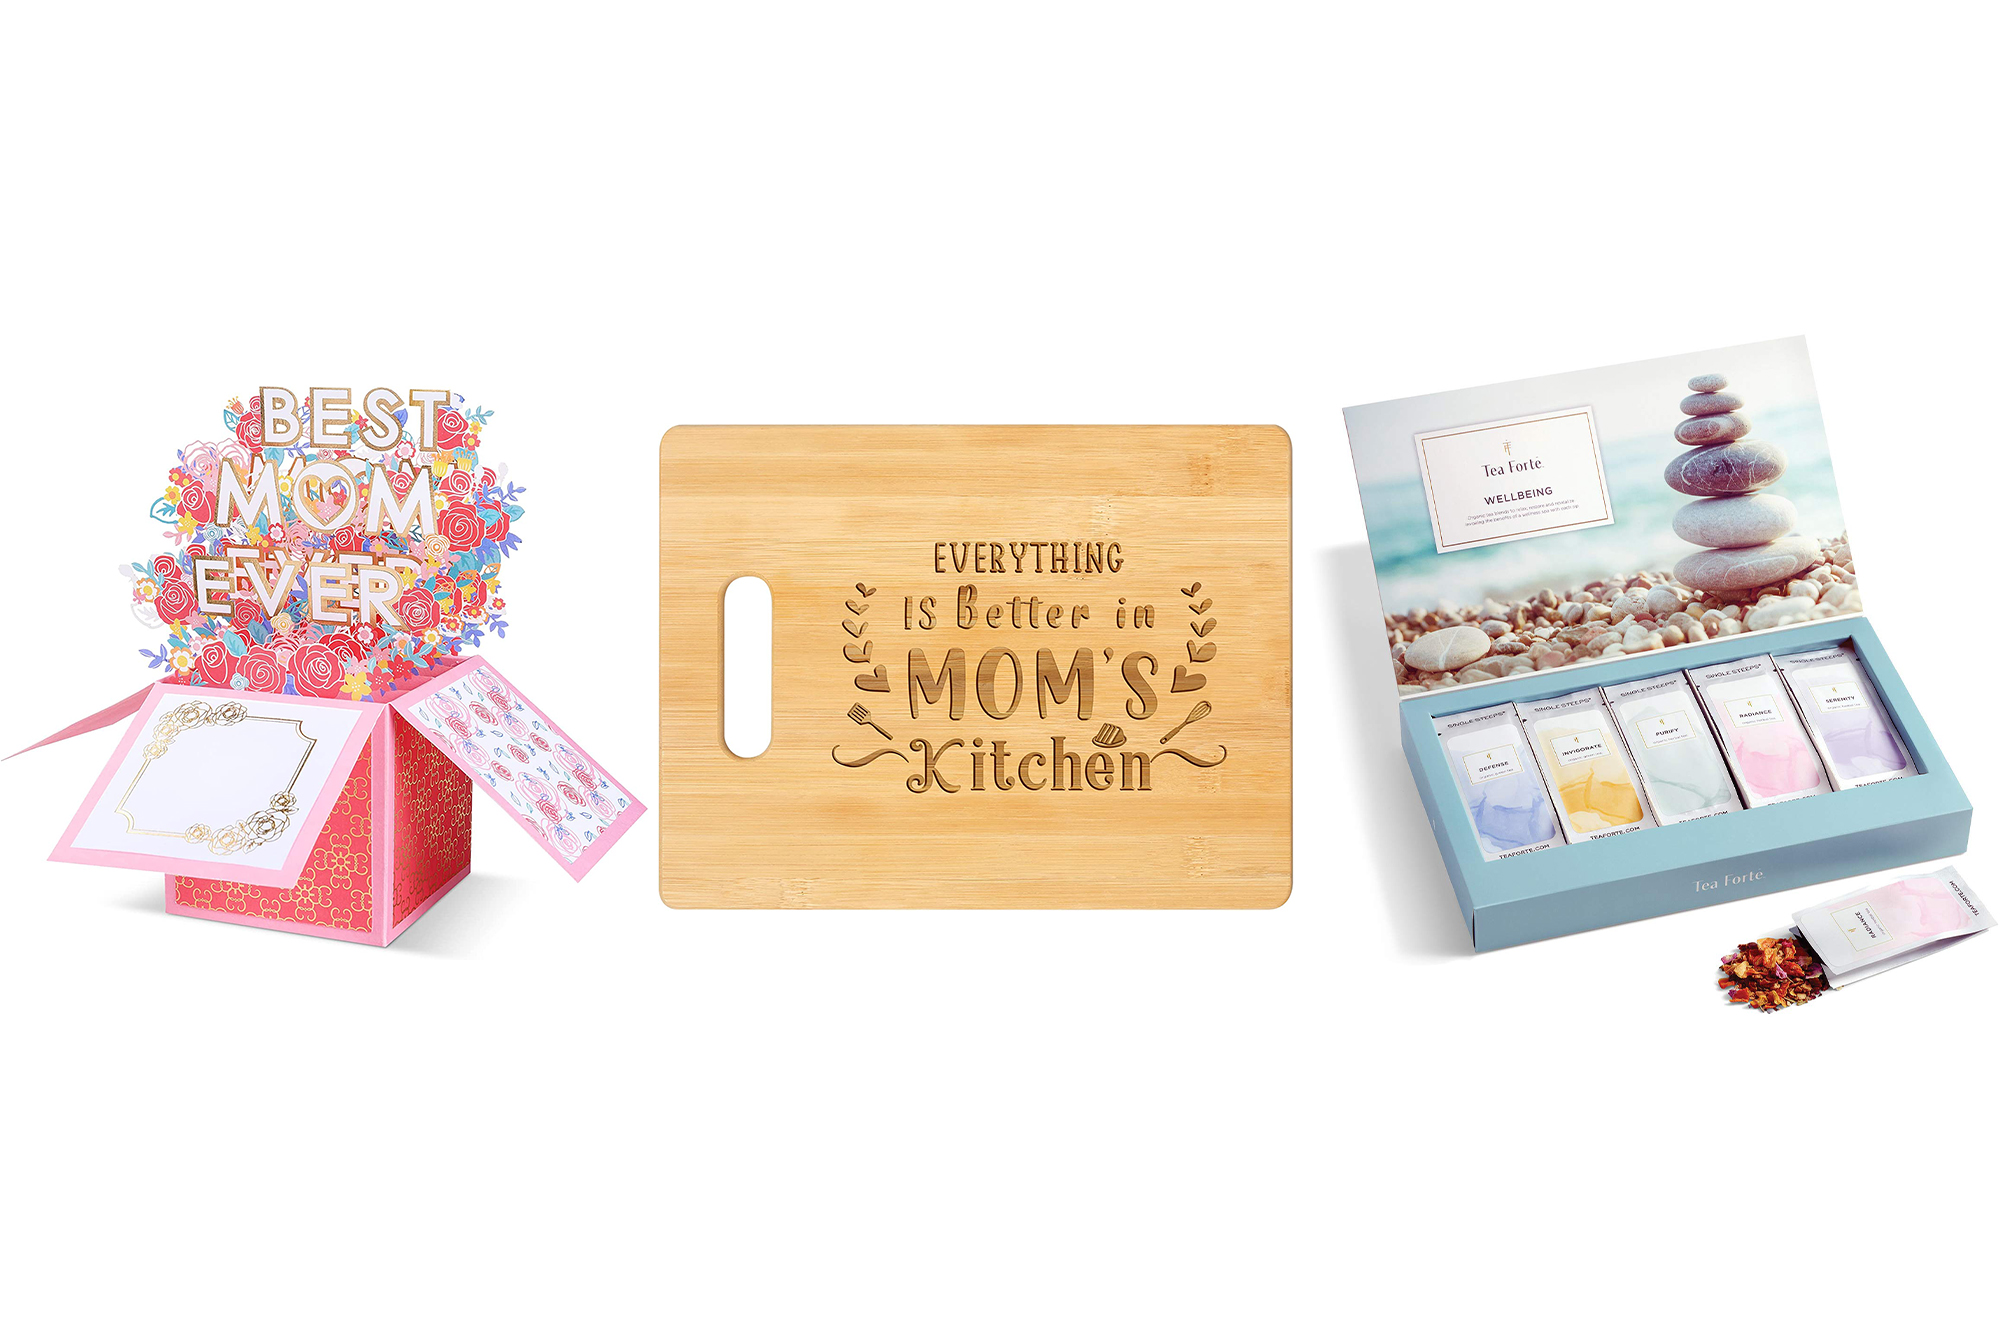 Cheap Mothers Day Gifts Under 20 Dollars, Bulk Mothers Day Church